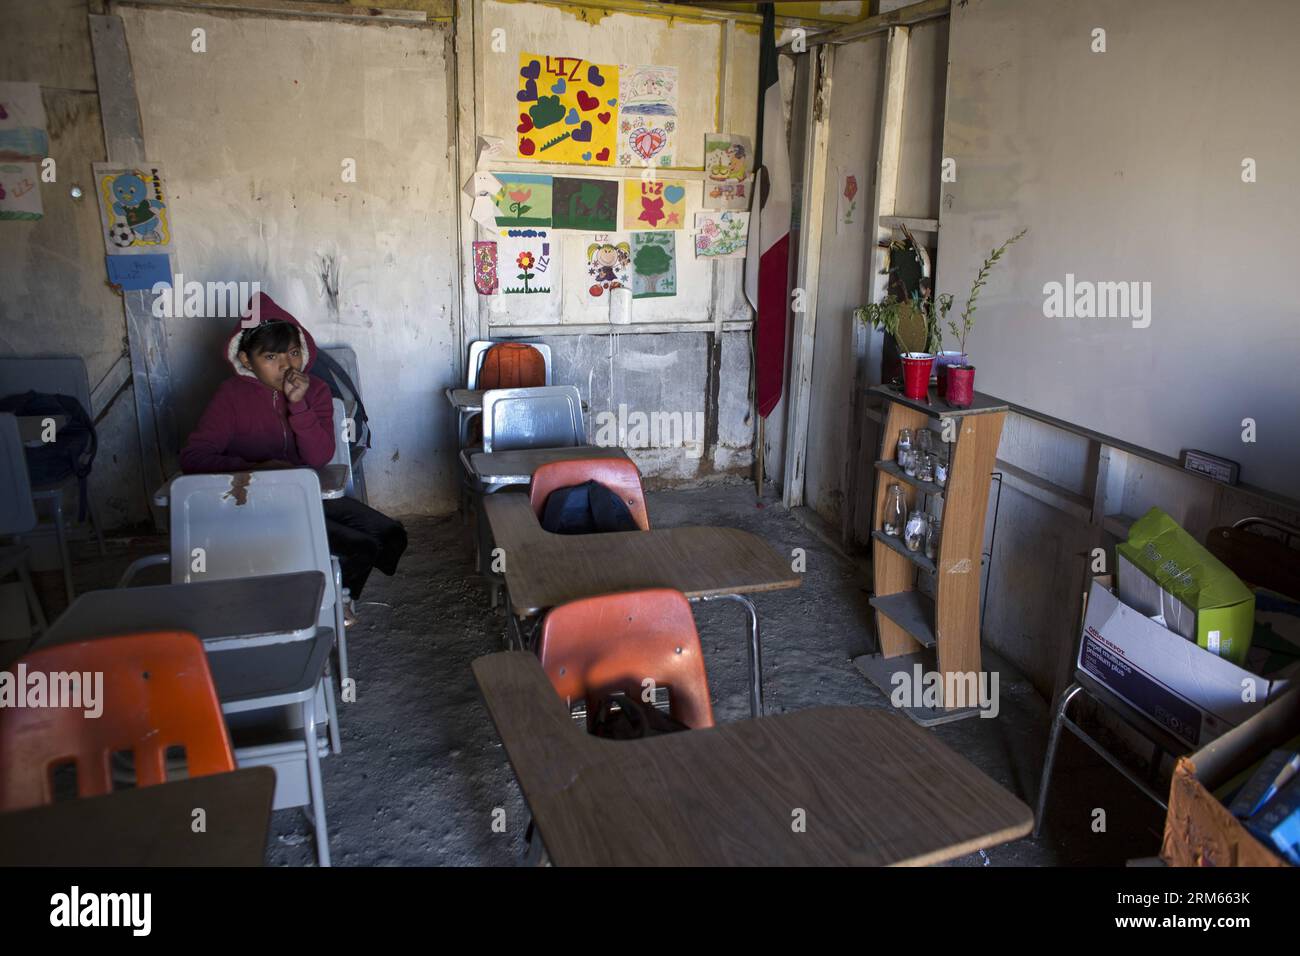 Bildnummer: 60815778  Datum: 10.12.2013  Copyright: imago/Xinhua     TIJUANA,  -- Photo shows a boy staying inside his classroom in the The New Hope school in Tijuana, northwest Mexico. The school New Hope , which was just opened two months ago, has 51 students from 1st until sixth grade of elementary school. It is supported by the National Educational Development Council, the only official institution that gives them didactic material and a monthly economic stimulus of 1900 pesos, for the two teachers in the school. The school was built by the students parents, with waste materials. Thanks to Stock Photo